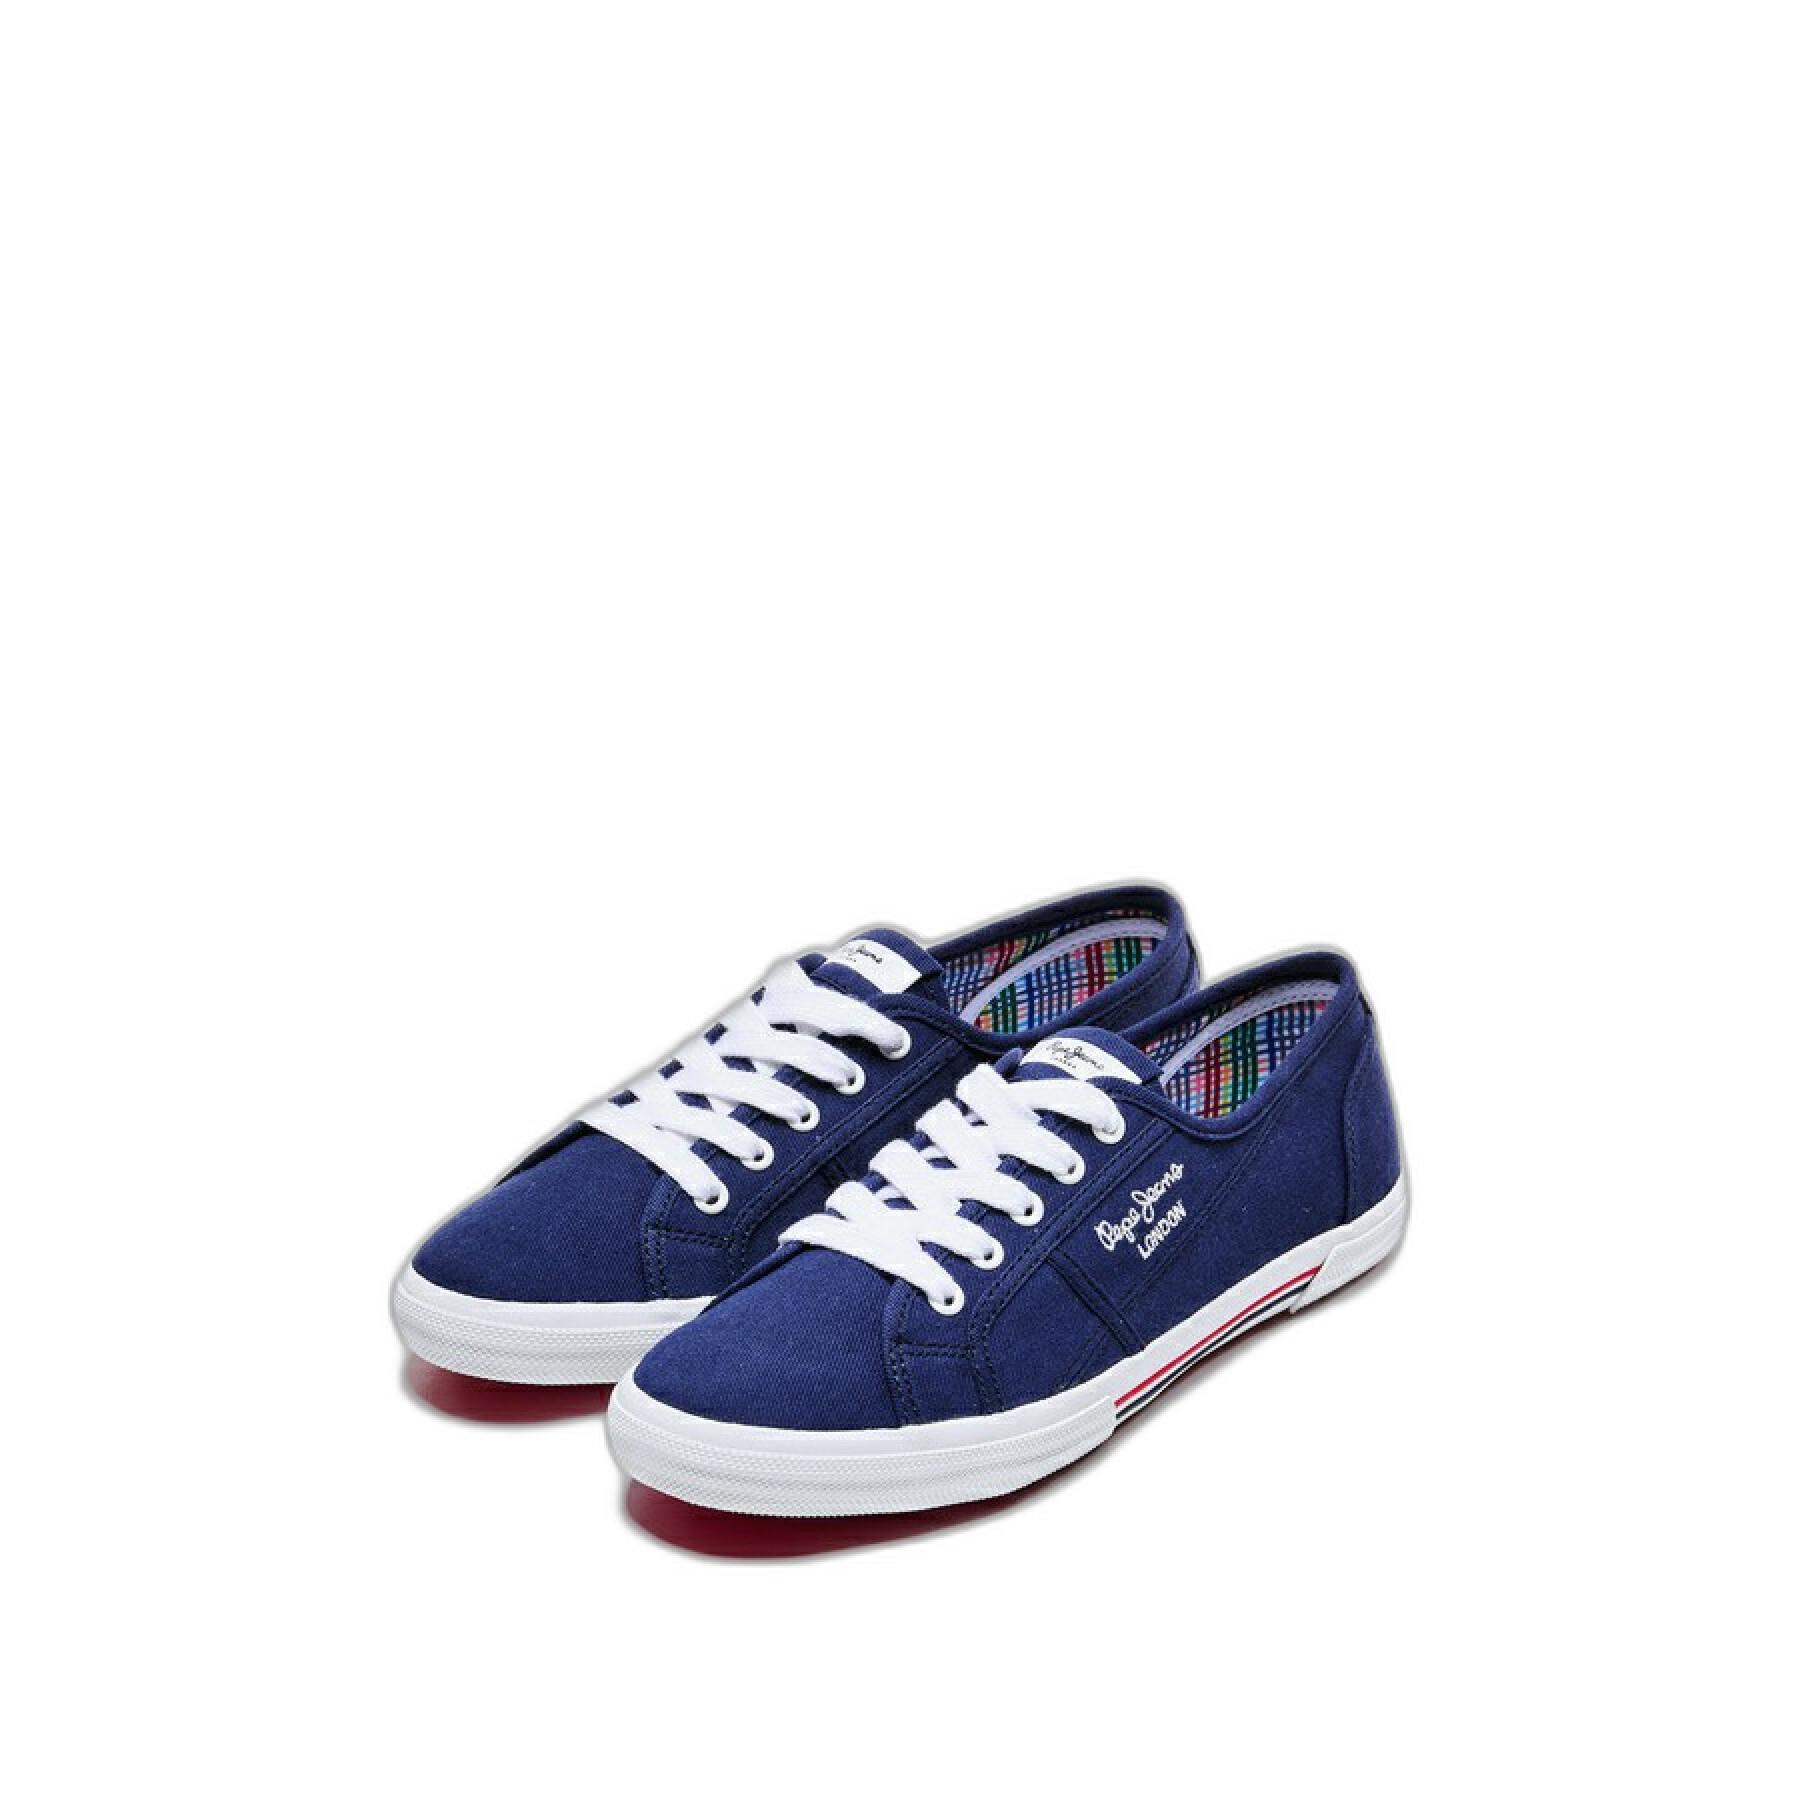 Women's sneakers Pepe Jeans Aberlady Ecobass